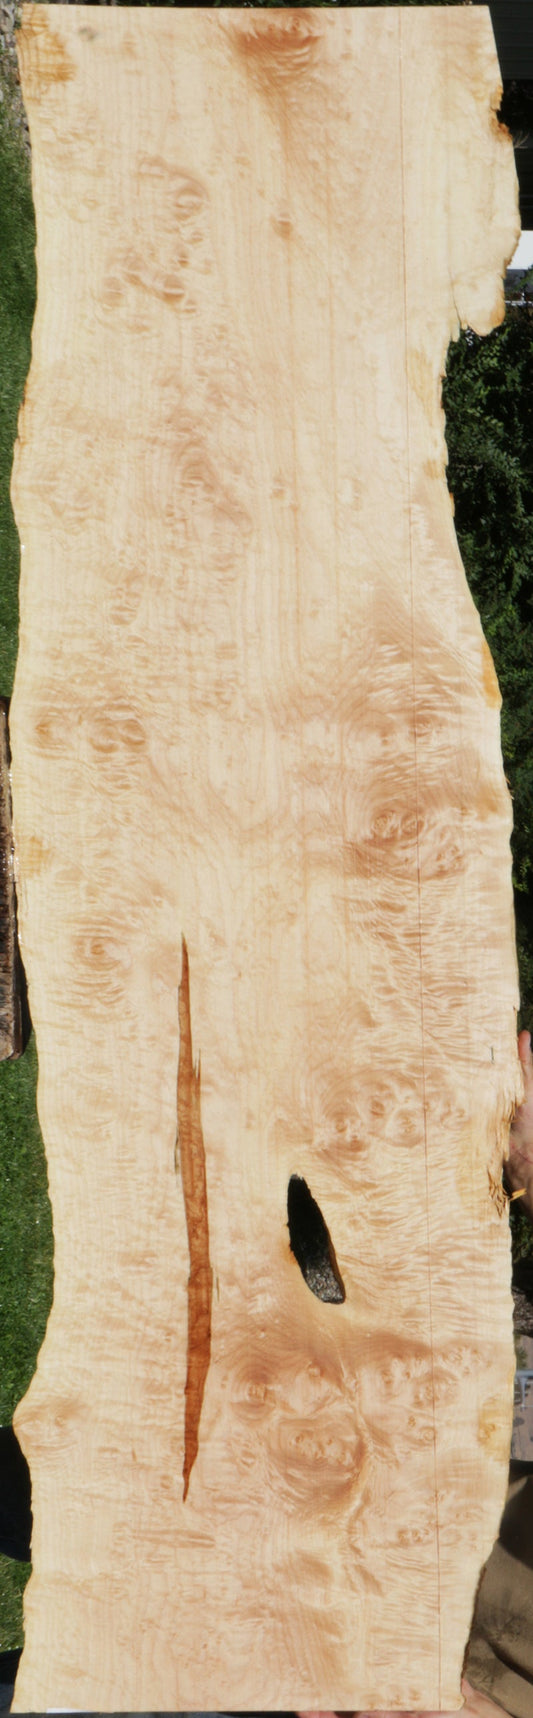 Maple Live Edge Lumber (Freight Shipping Required)